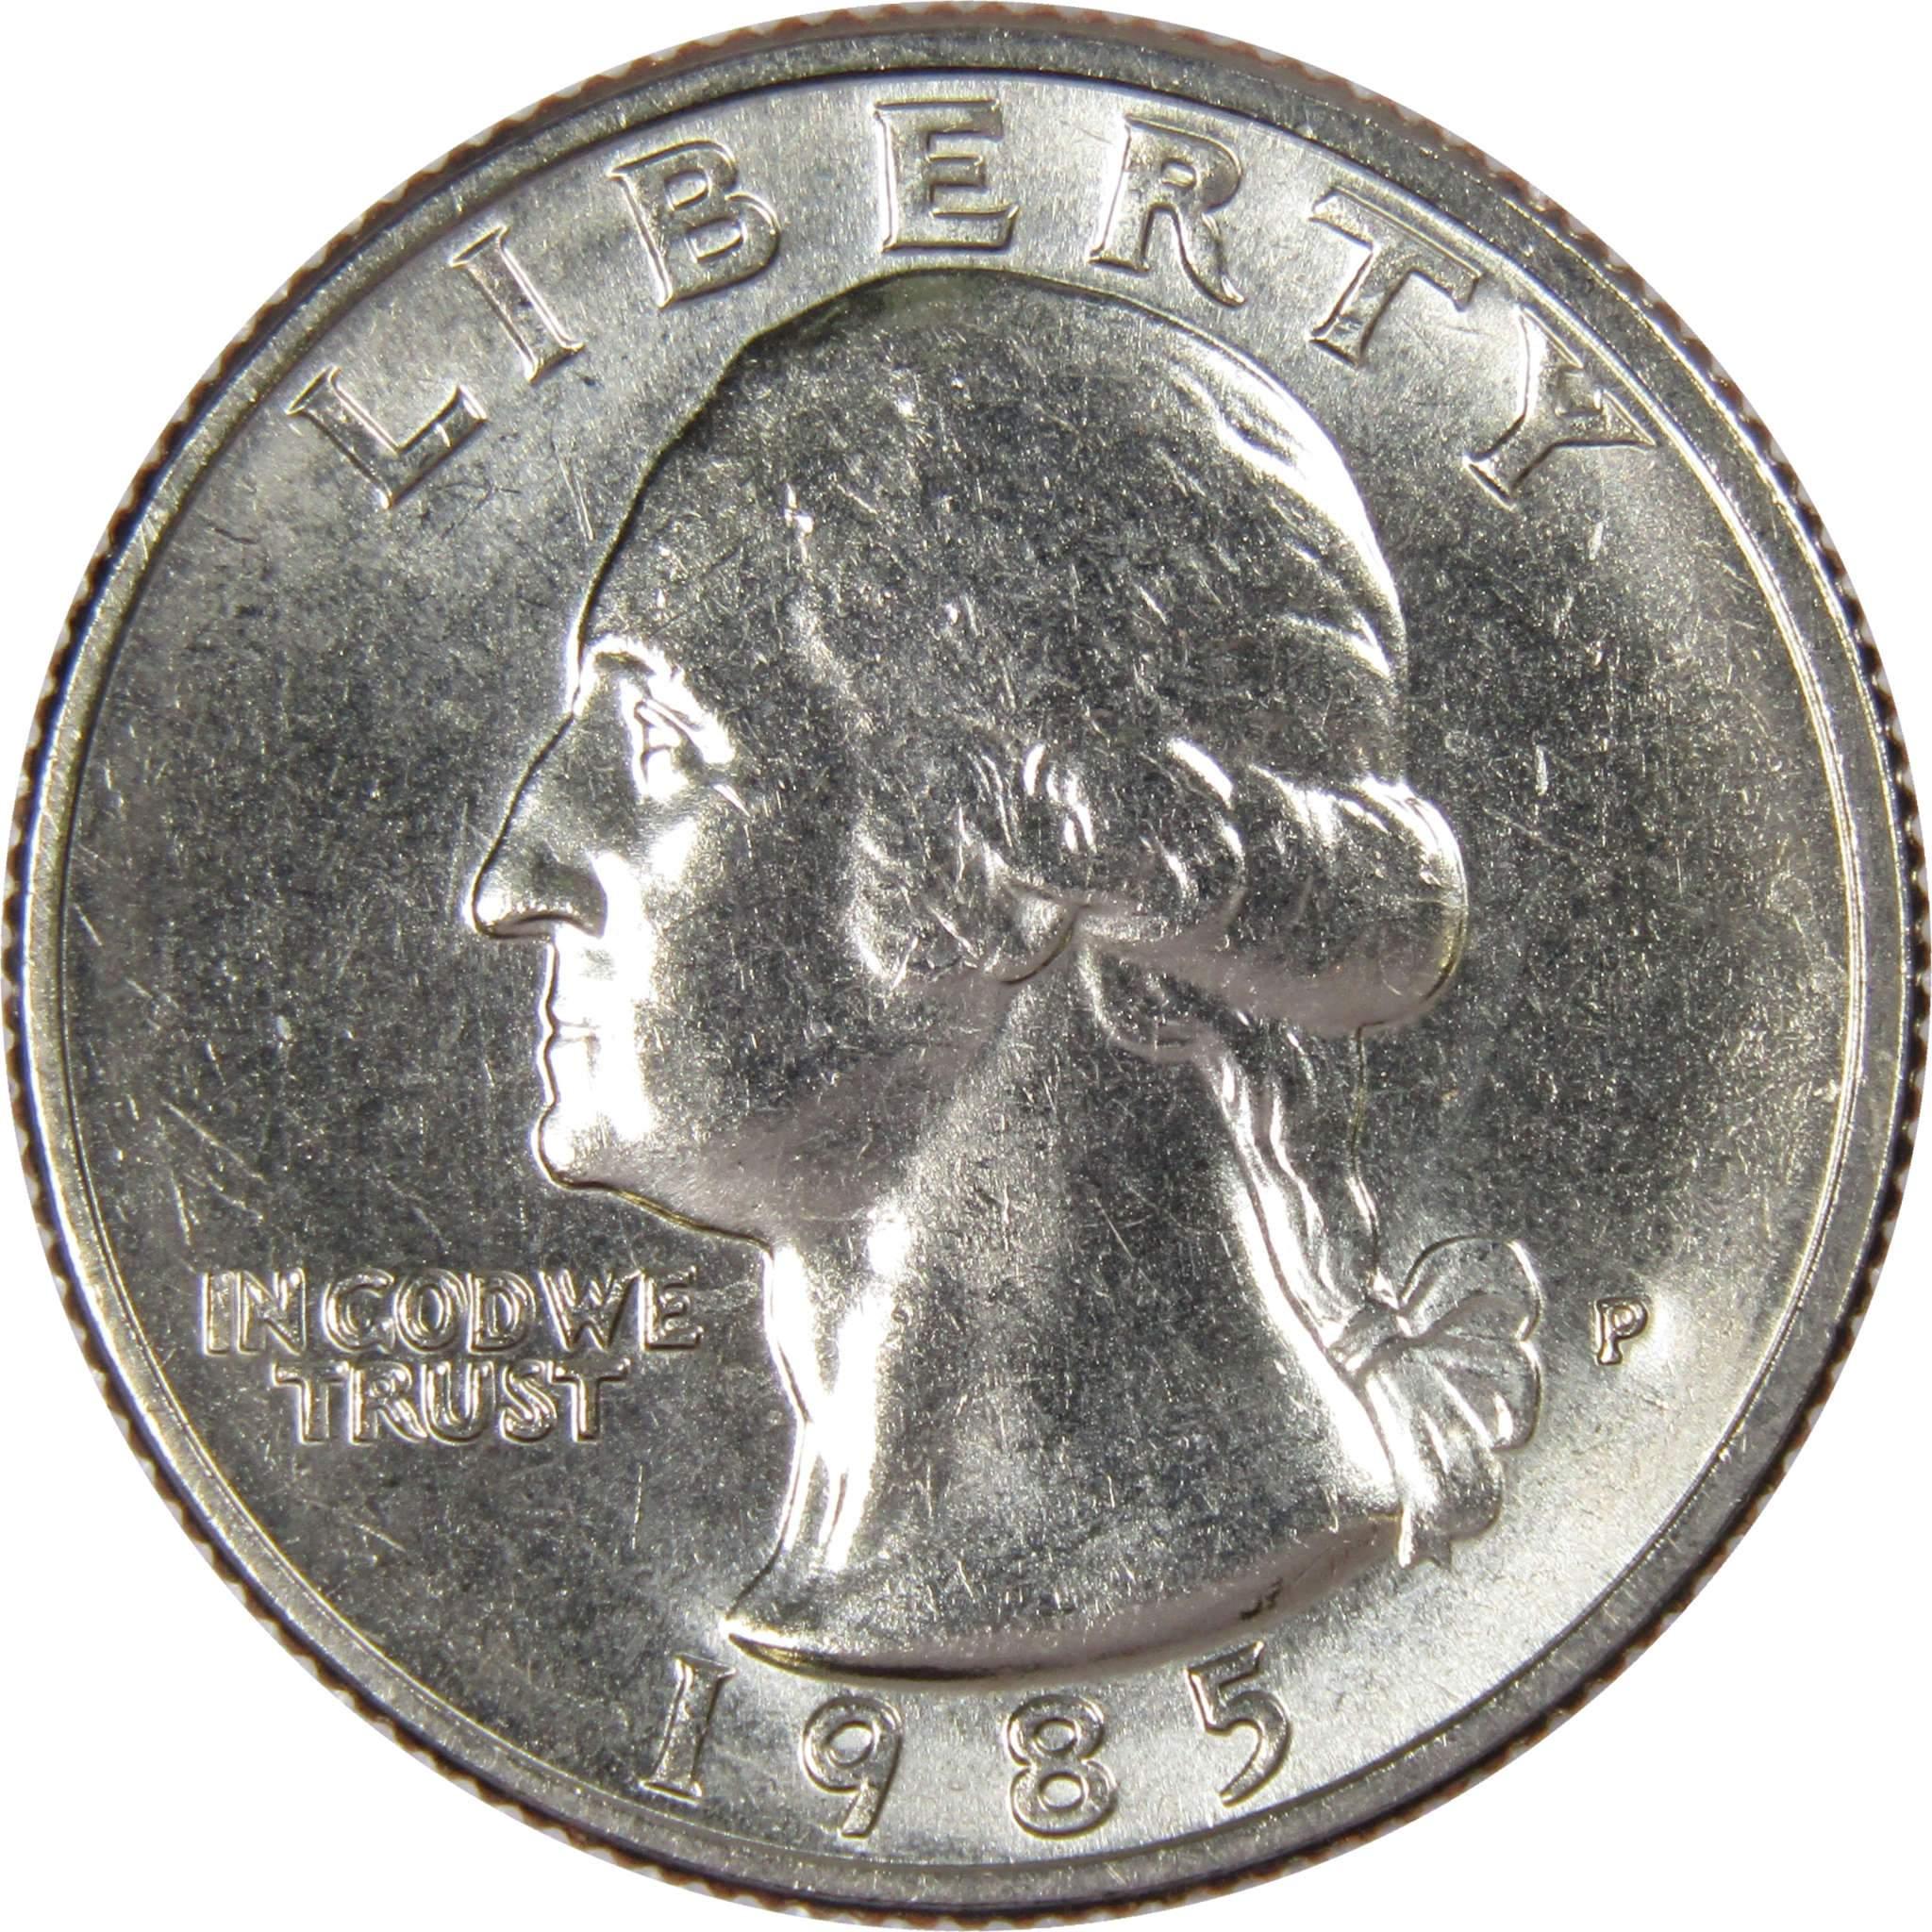 1985 P Washington Quarter BU Uncirculated Mint State 25c US Coin Collectible